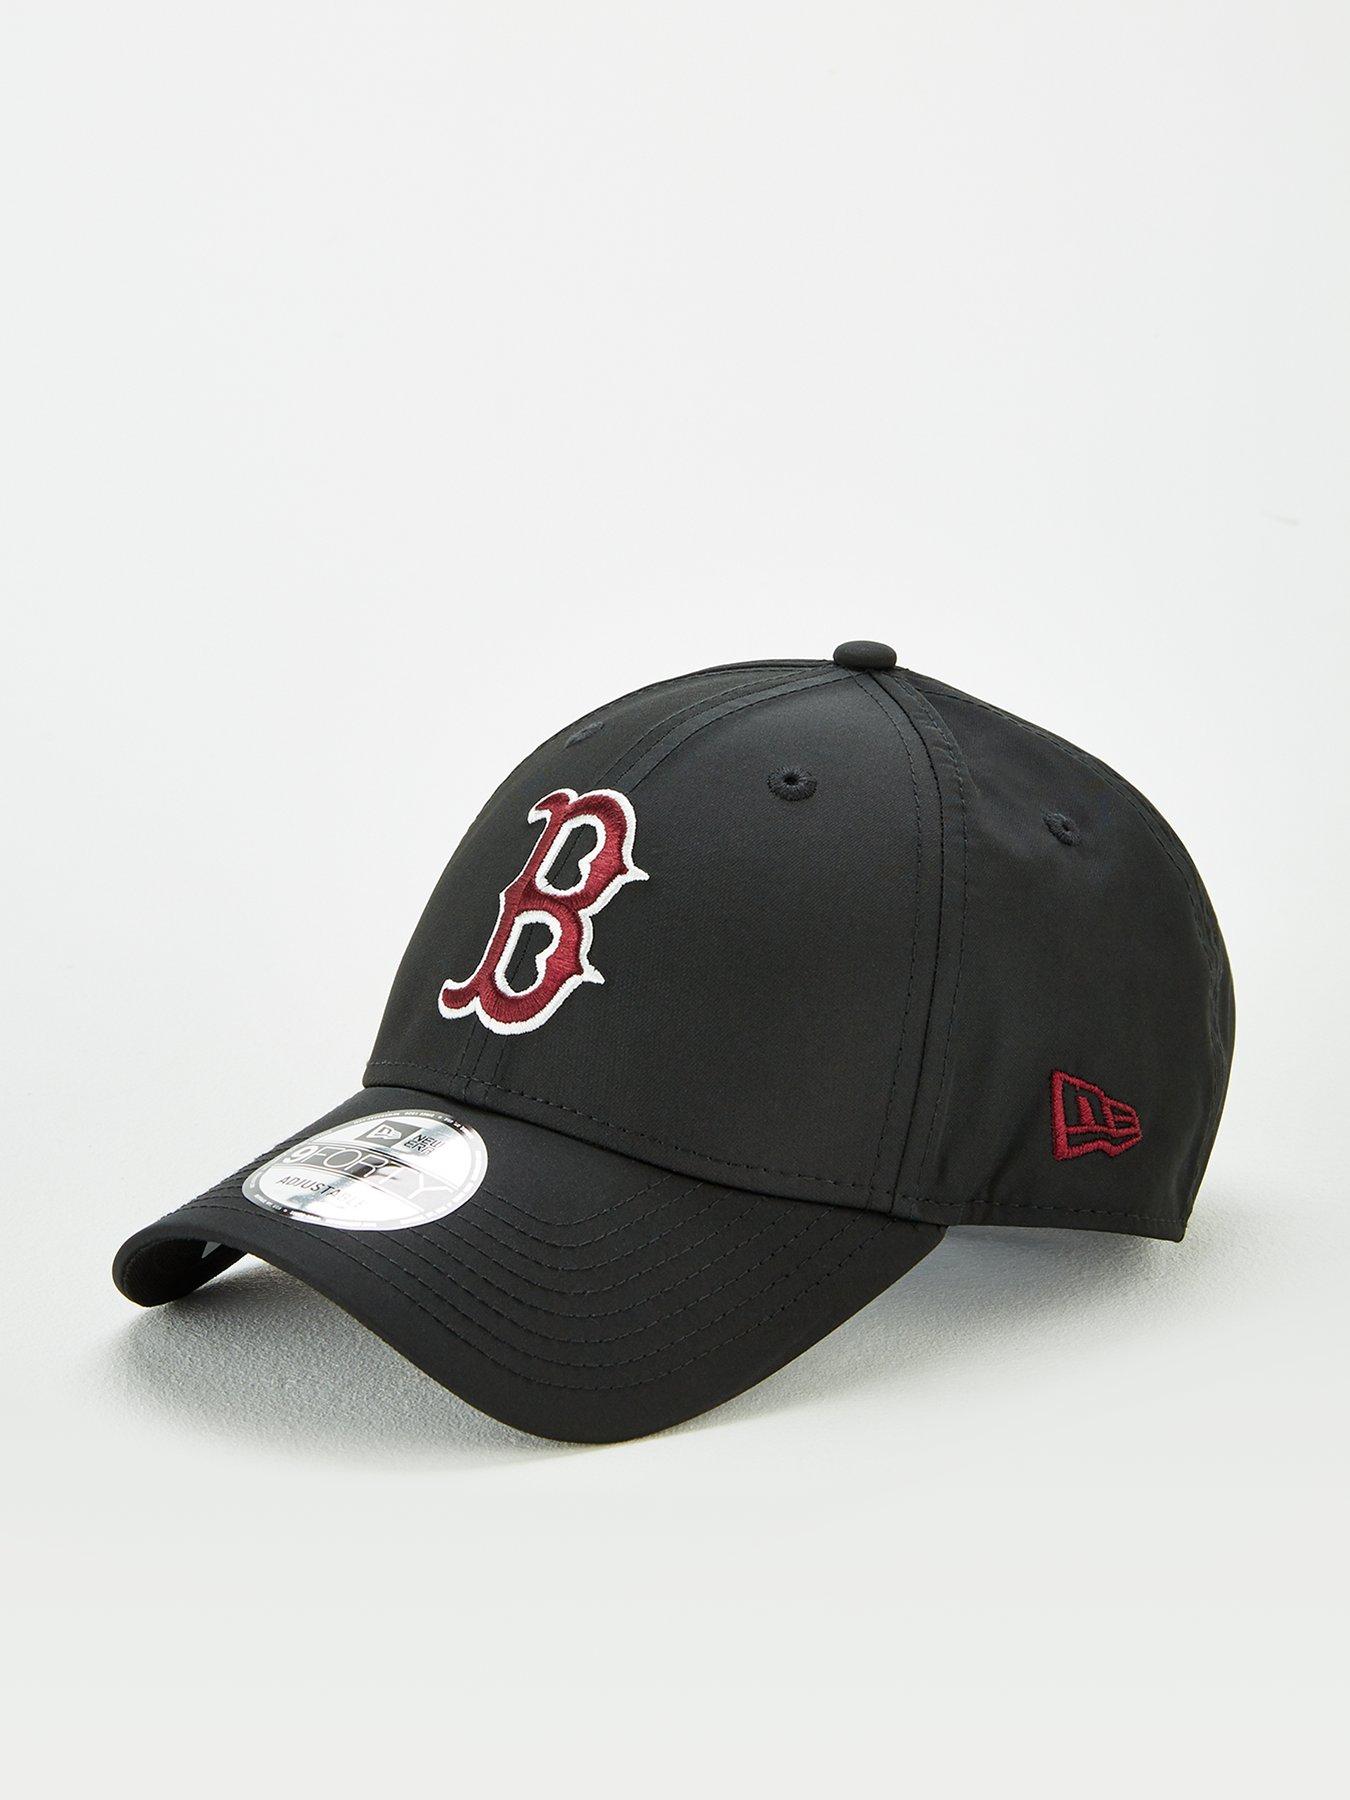 Official New Era Boston Red Sox League Blue 9FORTY Cap 1326_253 1326_253  1326_253